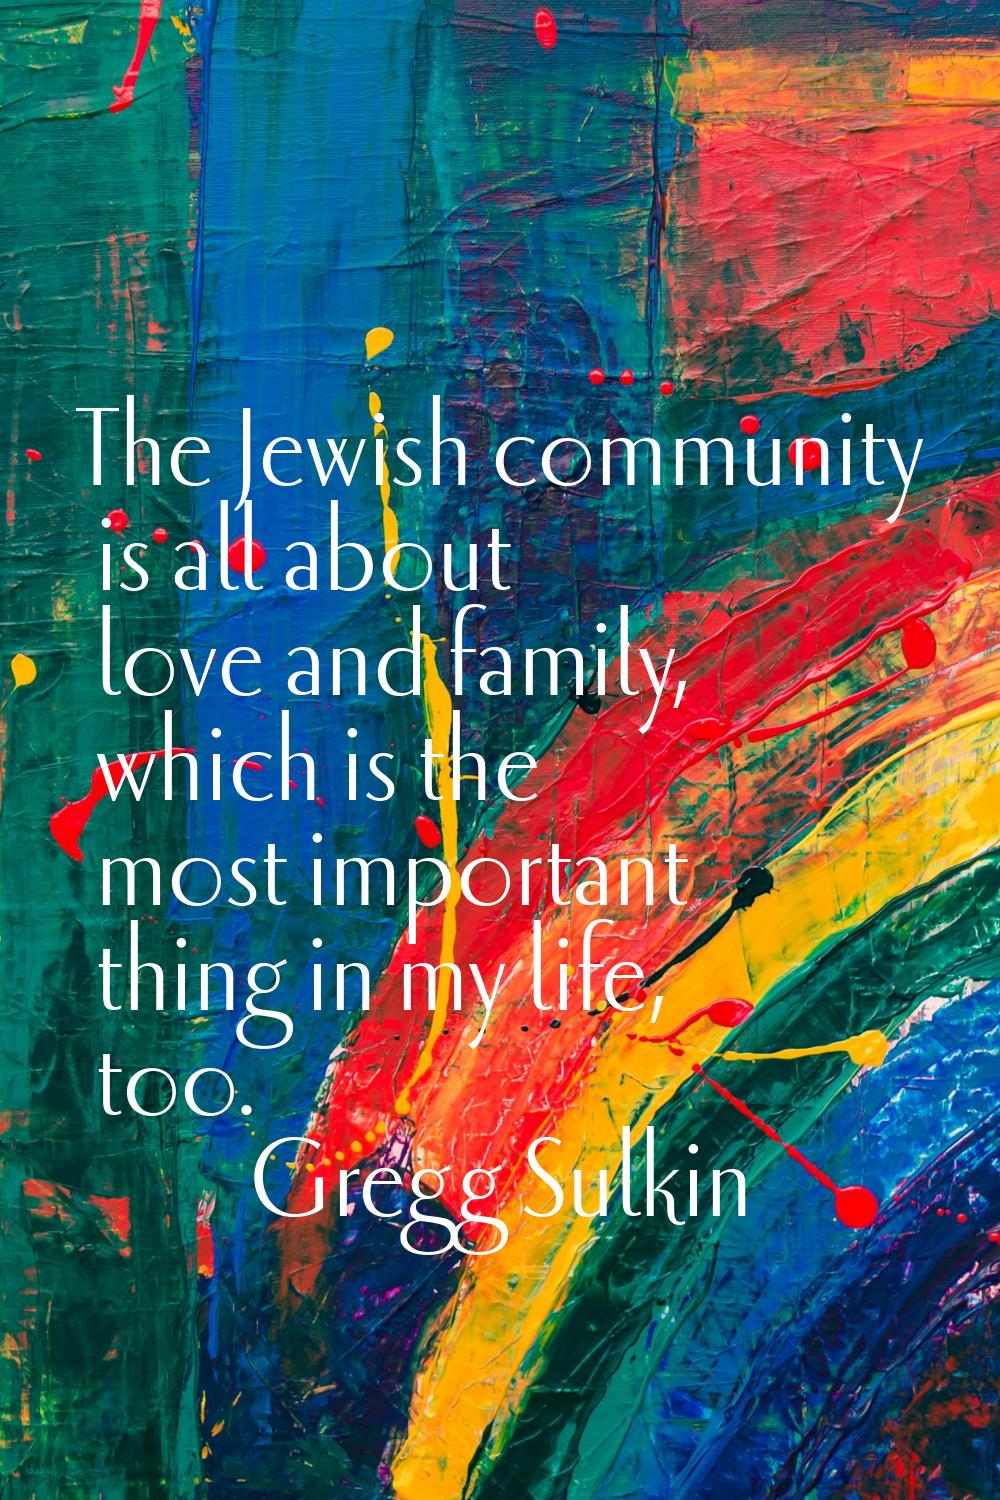 The Jewish community is all about love and family, which is the most important thing in my life, to